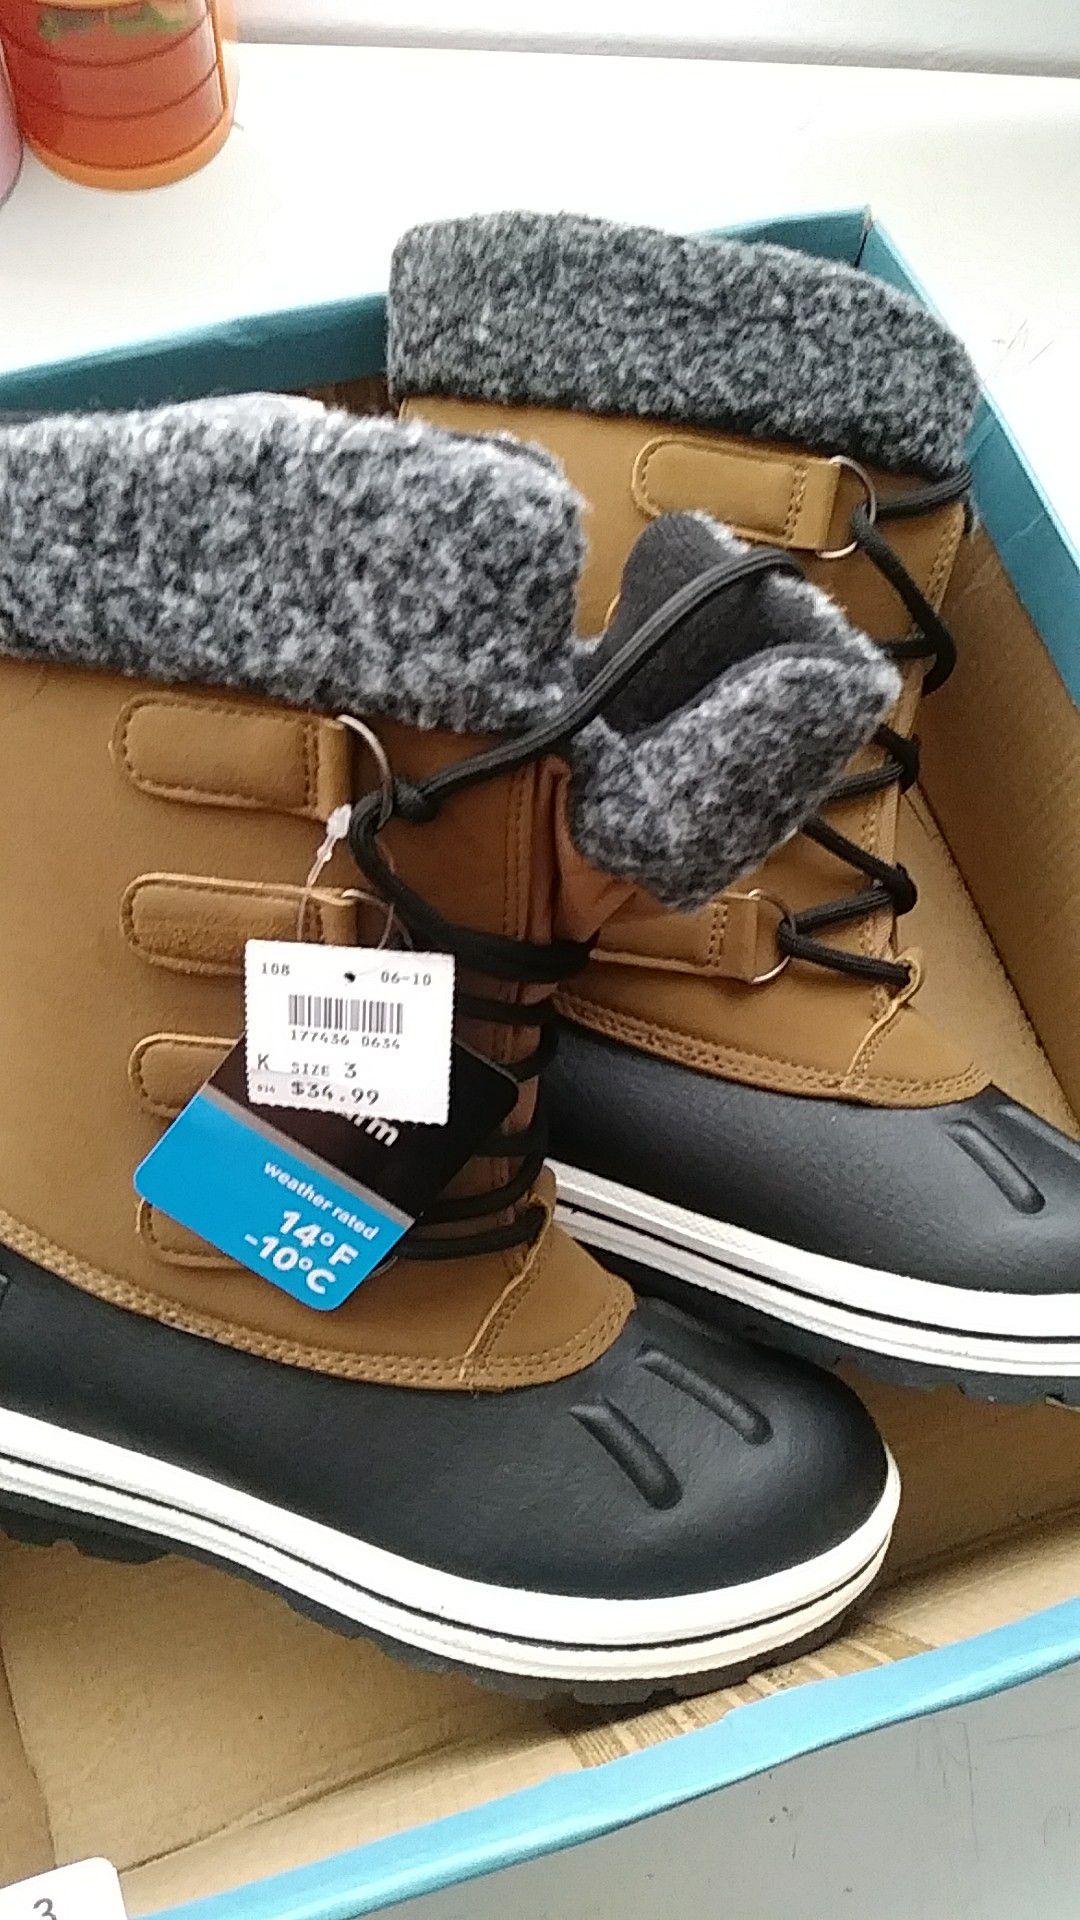 Snow Boots for kids size 3 brand new